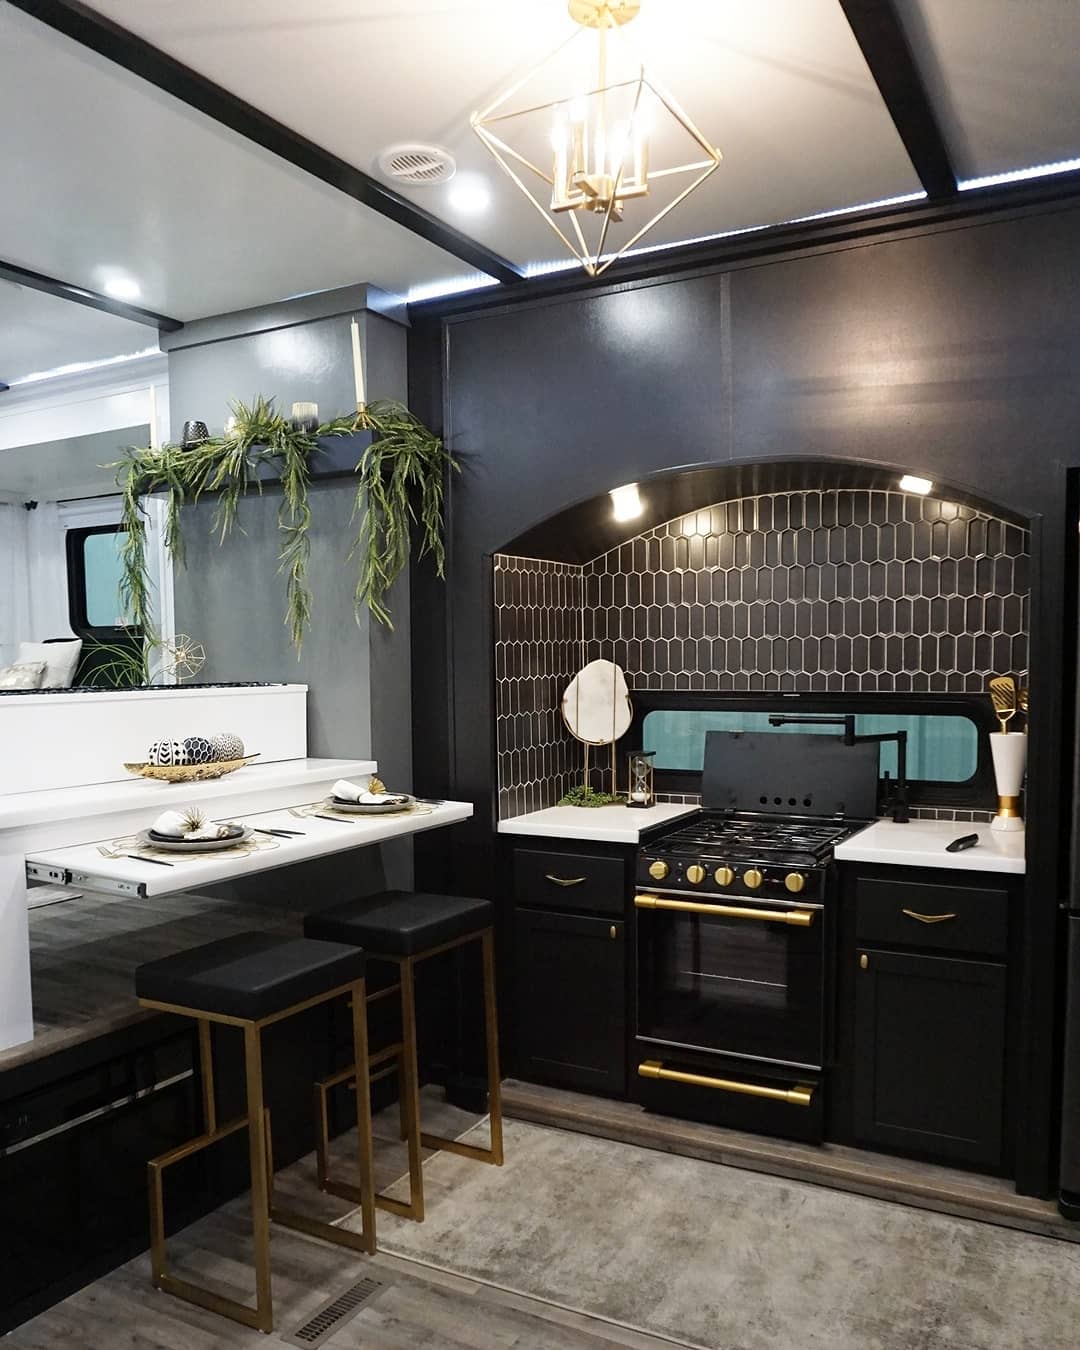 RV kitchen featuring hood lights and statement fixture on the ceiling. Photo by Instagram user @theflippingnomad.